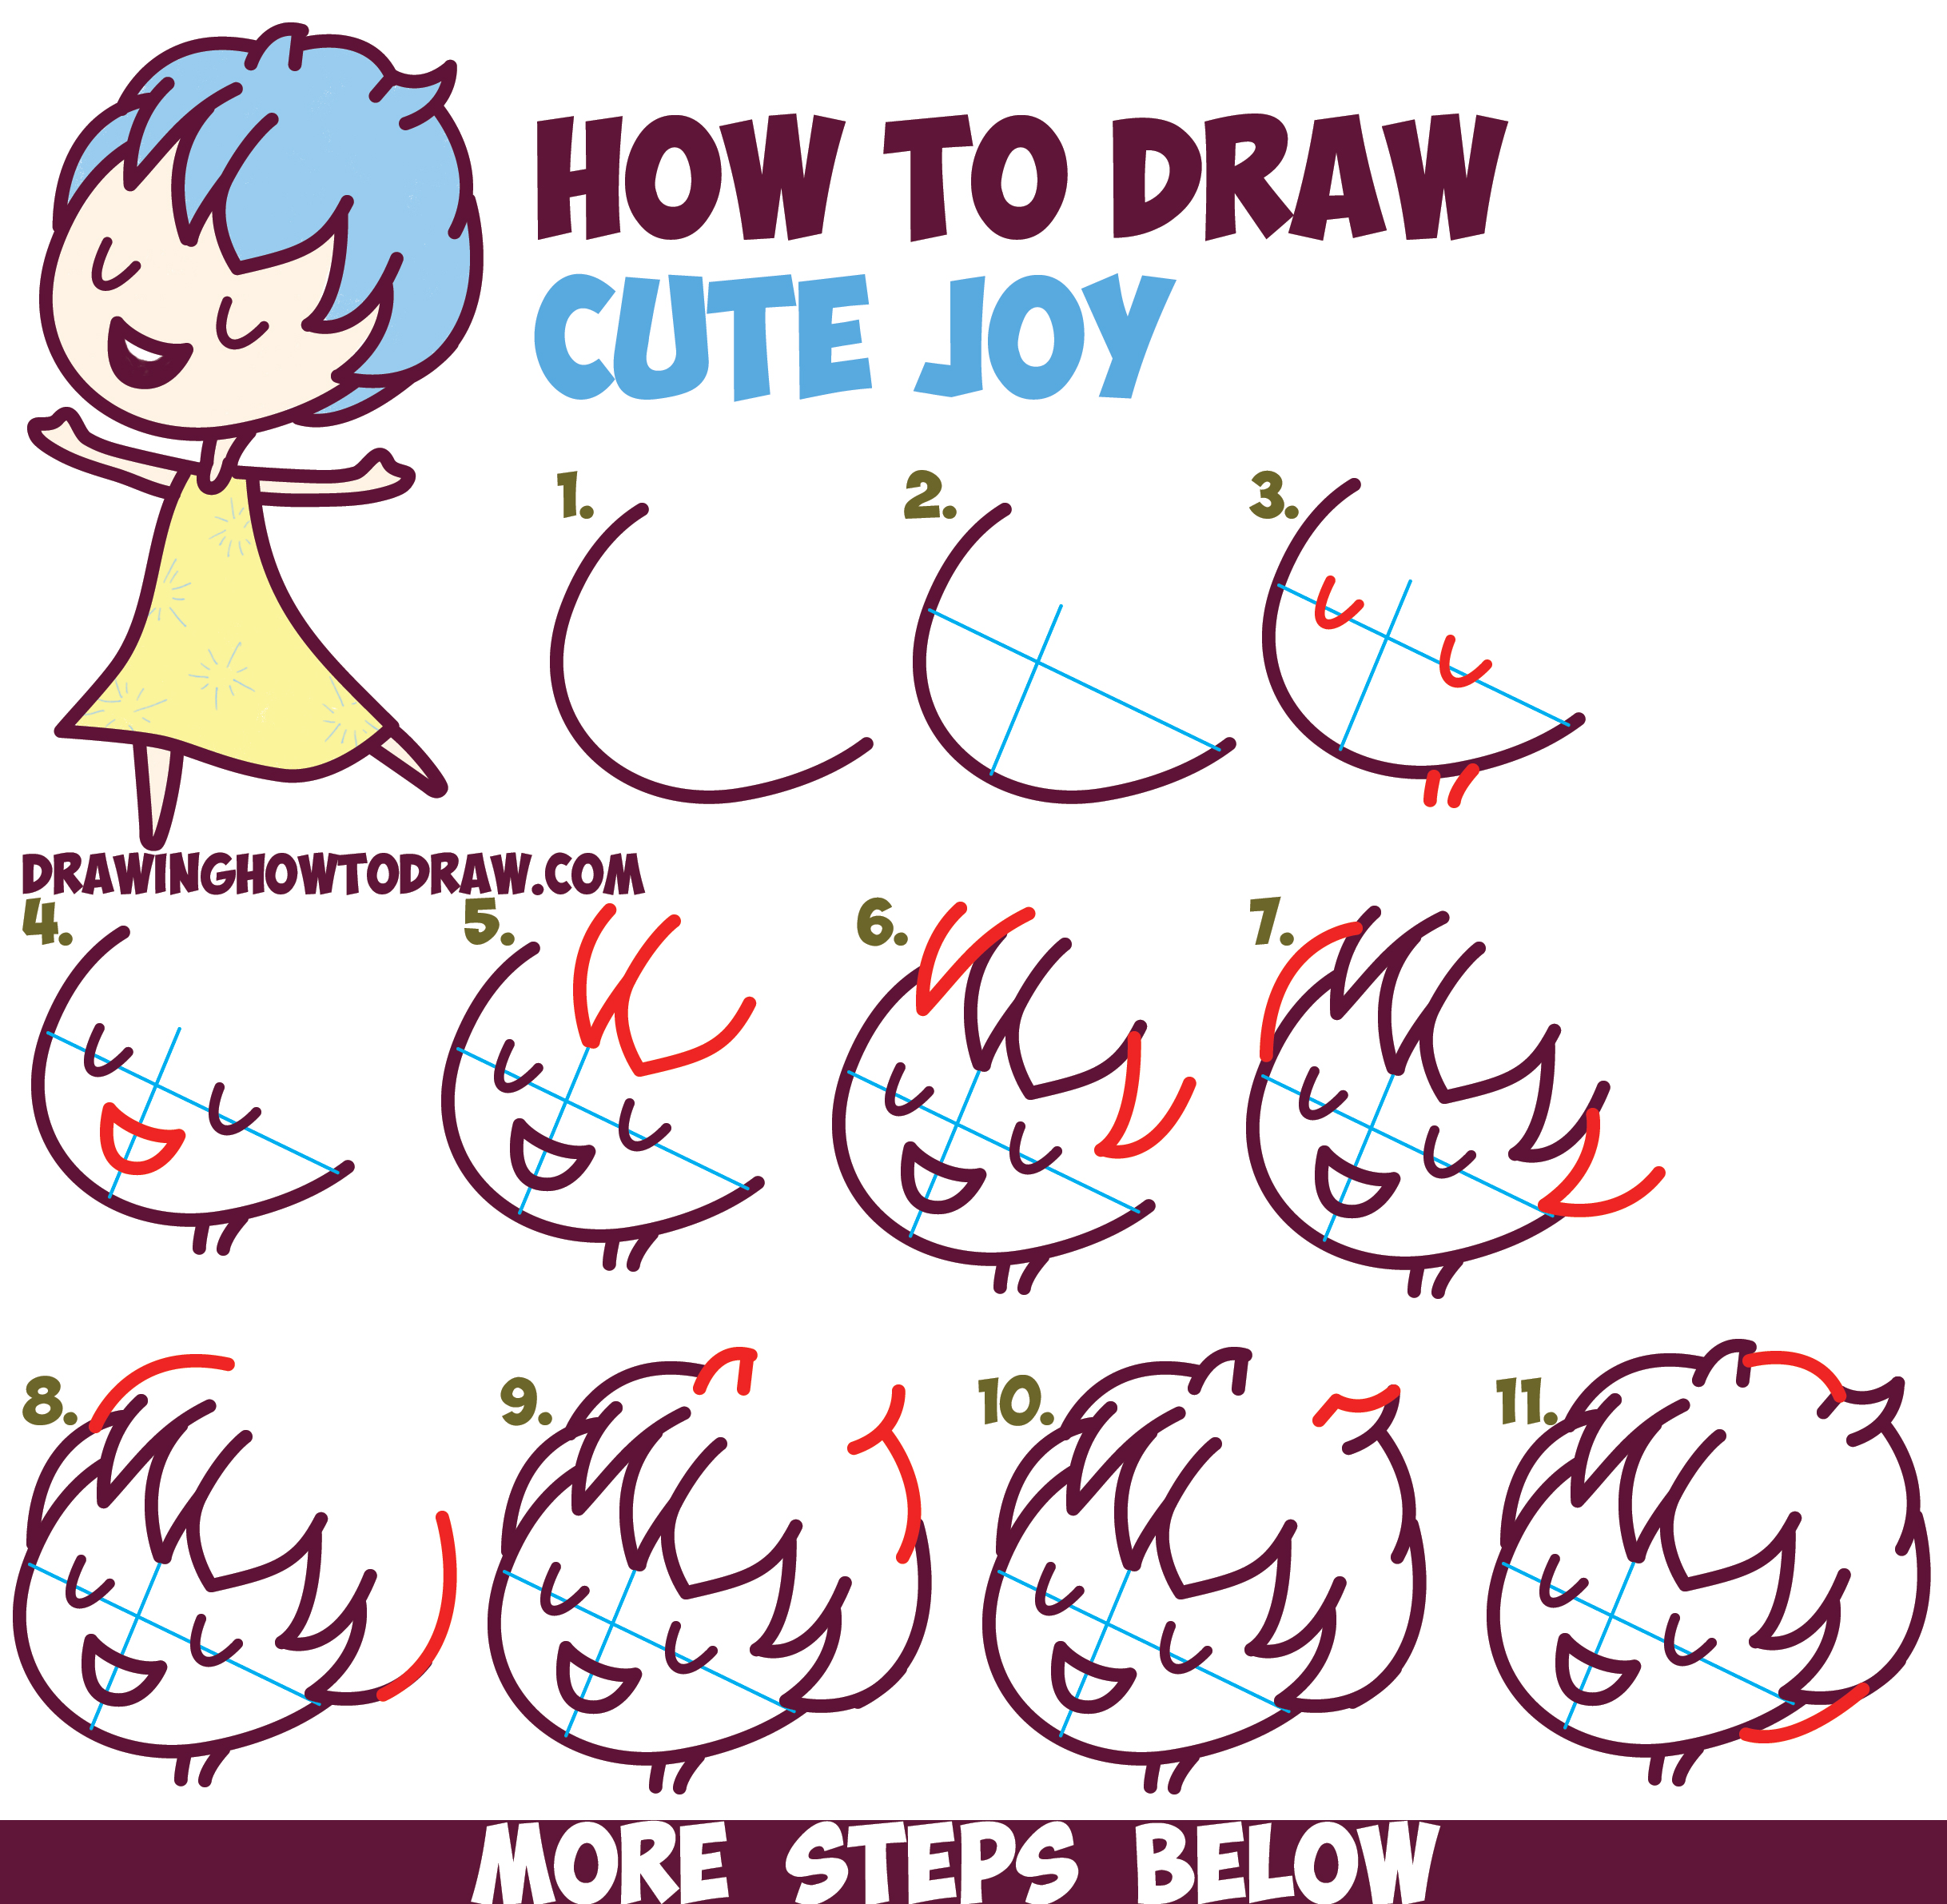 How to Draw Cute Kawaii / Chibi Joy from Inside Out - Easy Step by Step Drawing Tutorial for Kids